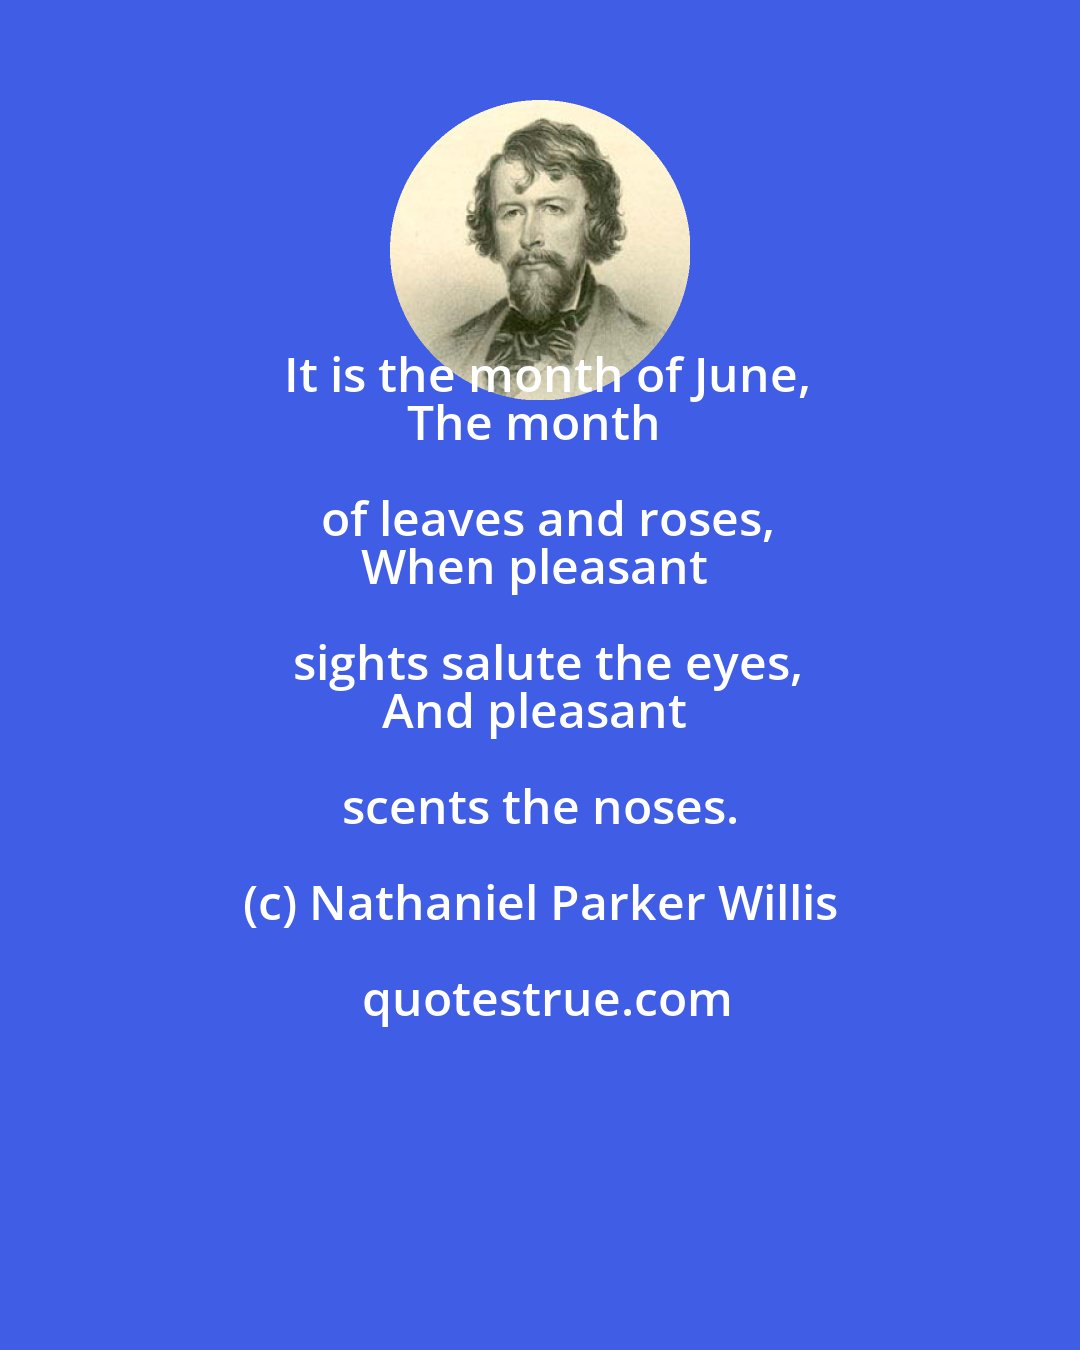 Nathaniel Parker Willis: It is the month of June,
The month of leaves and roses,
When pleasant sights salute the eyes,
And pleasant scents the noses.